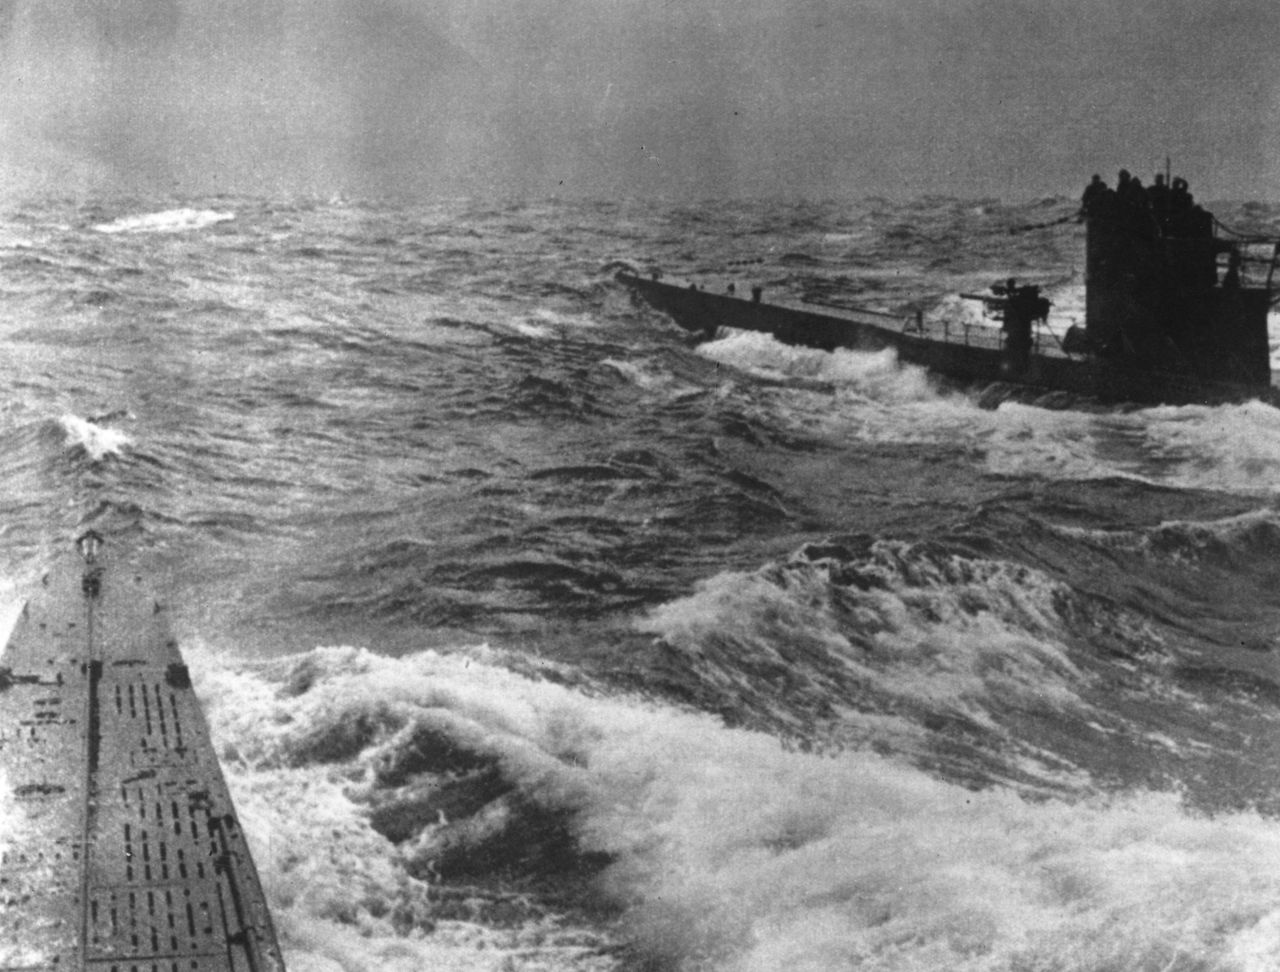 German U-boats being chased off the US coast in 1942.